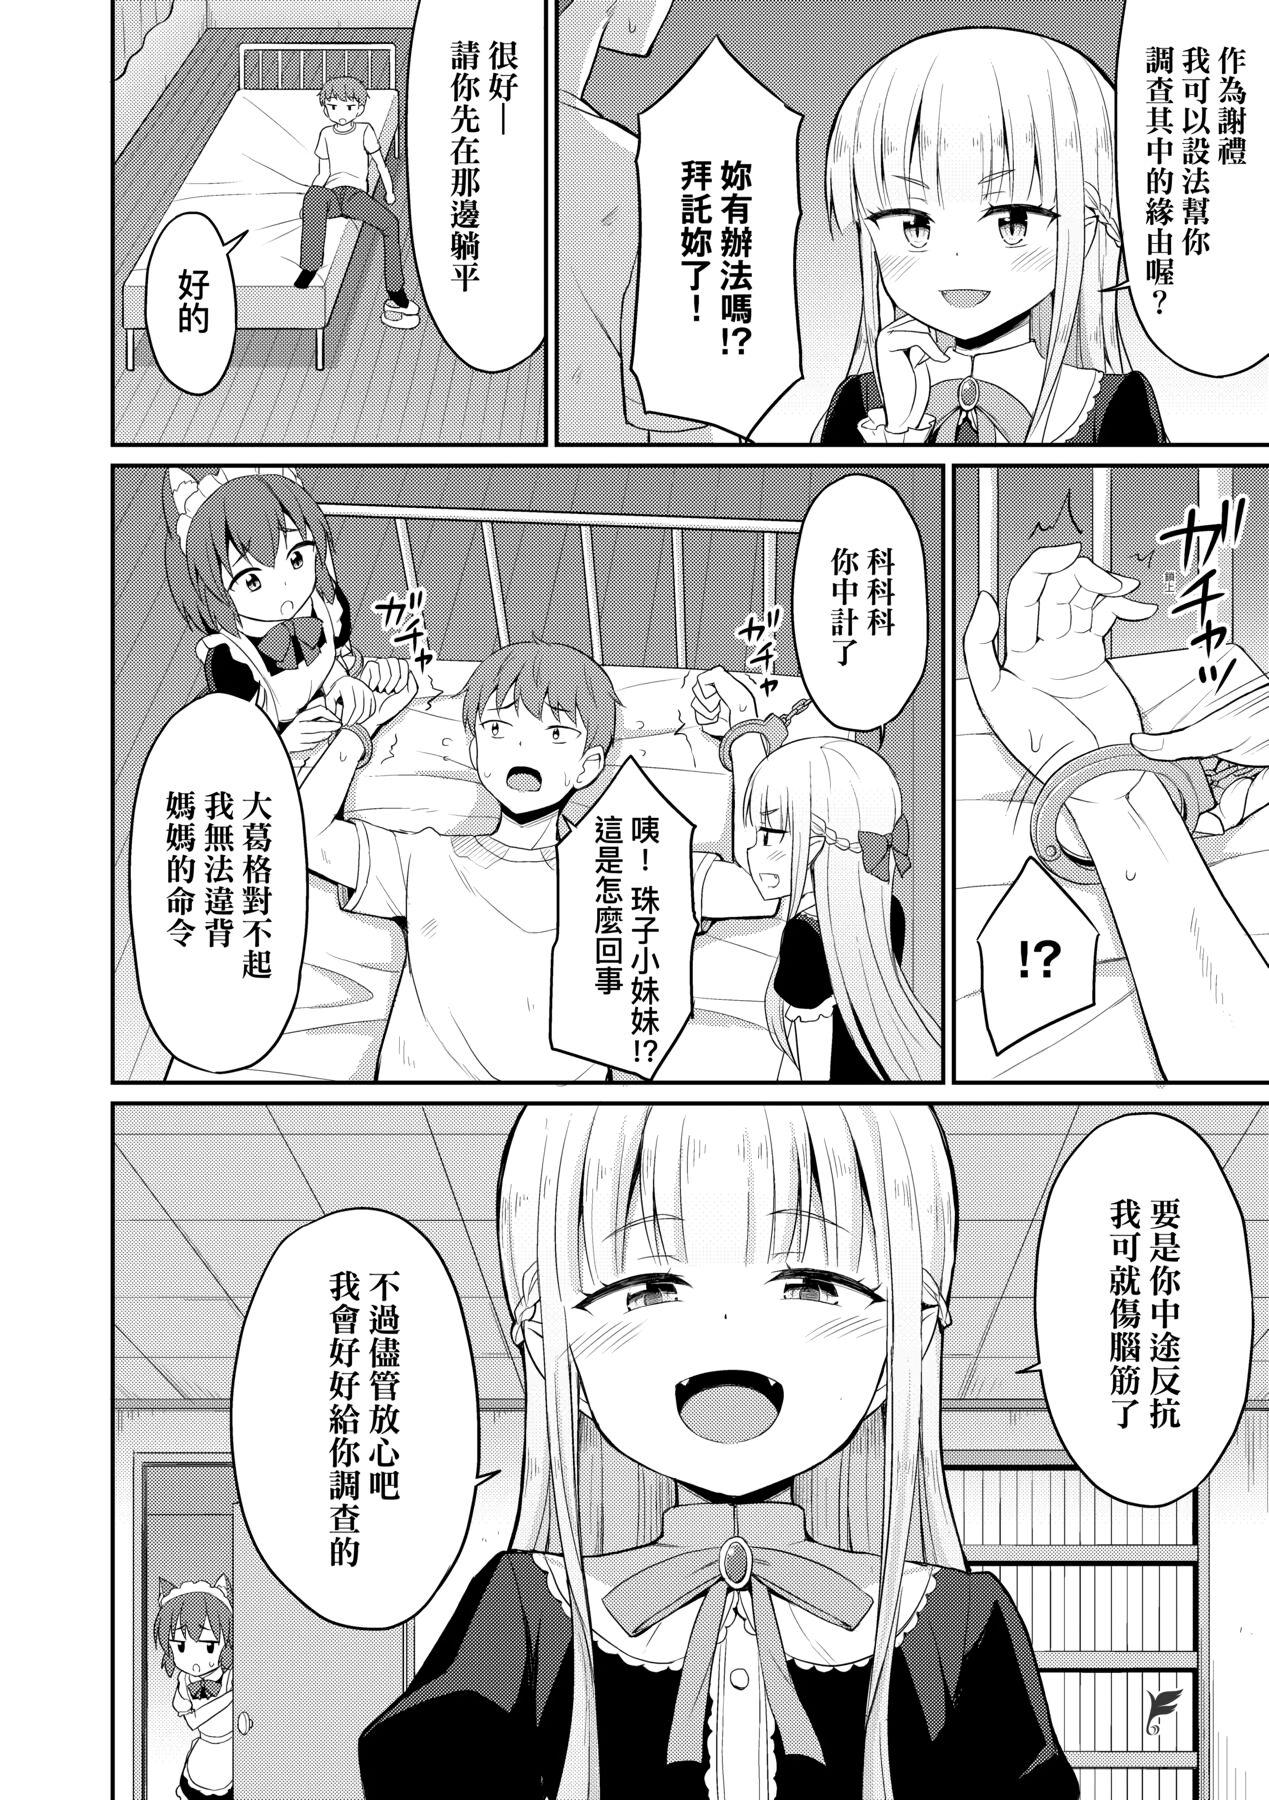 Porn Star Cafe Eternal e Youkoso! | 歡迎光臨咖啡永遠娘! Girlfriends - Page 11